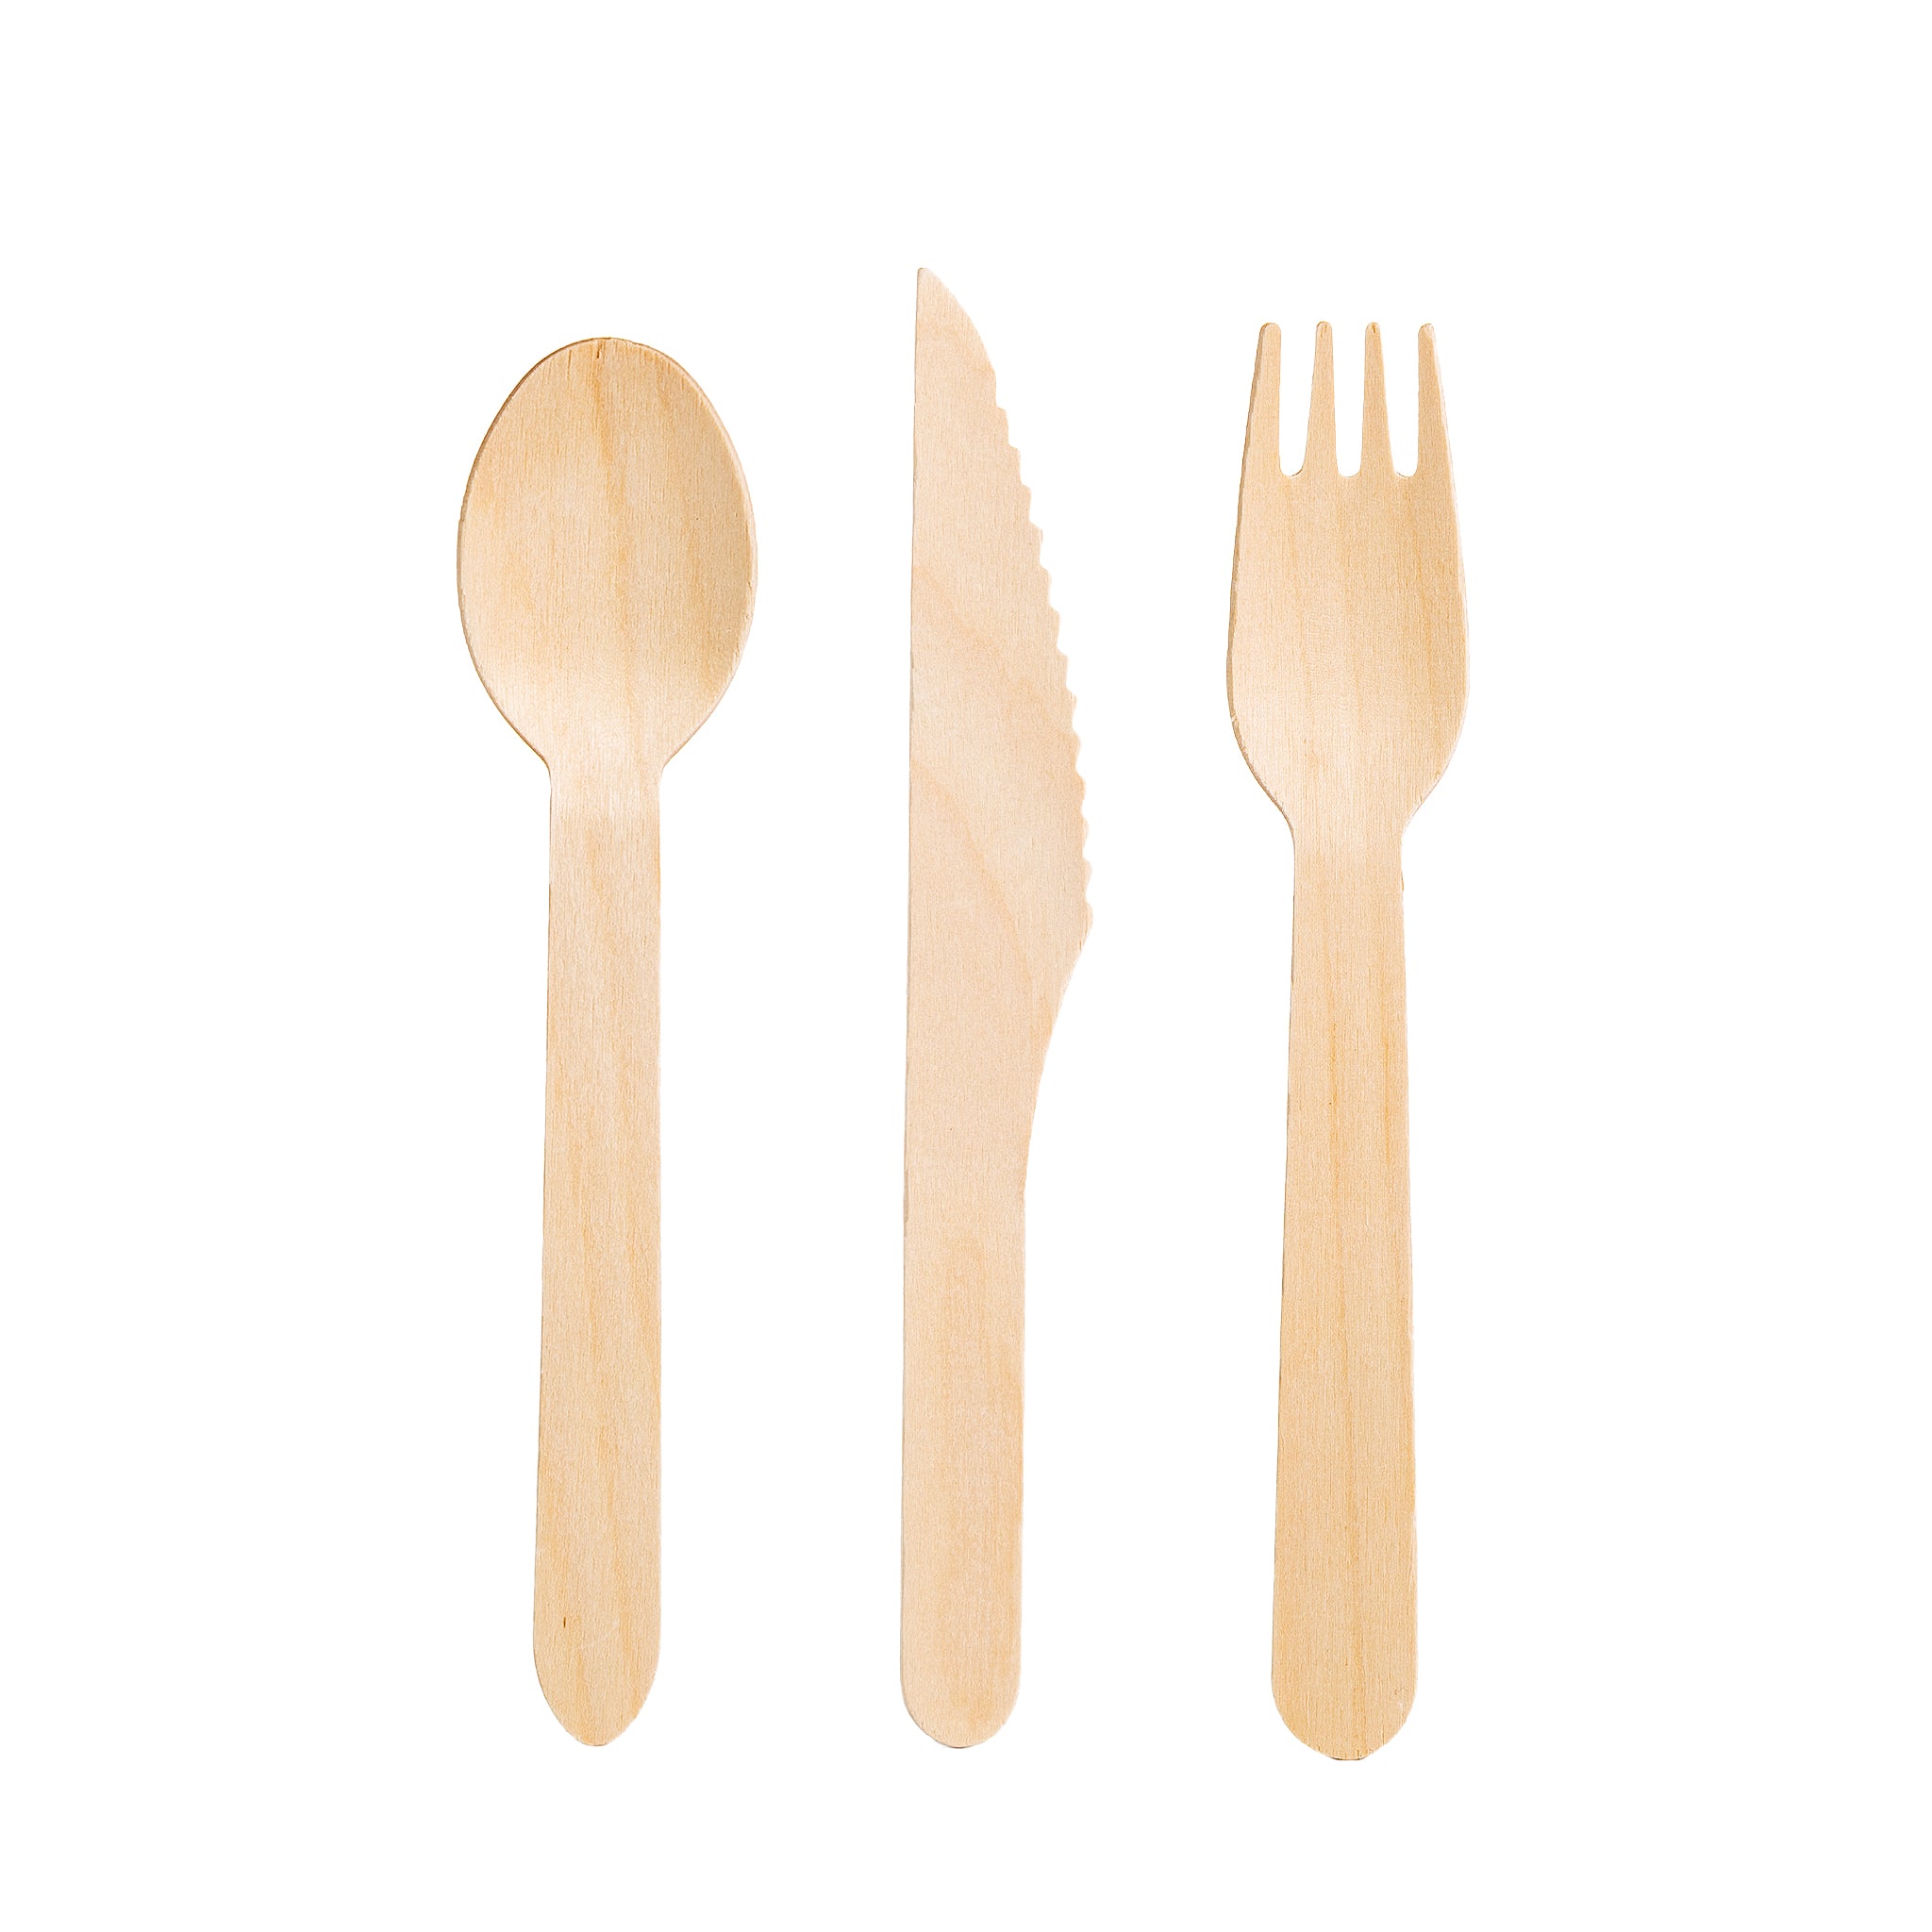 WoodU Disposable Wooden Cutlery Set 100 pcs All Natural Eco-friendly Non-toxic